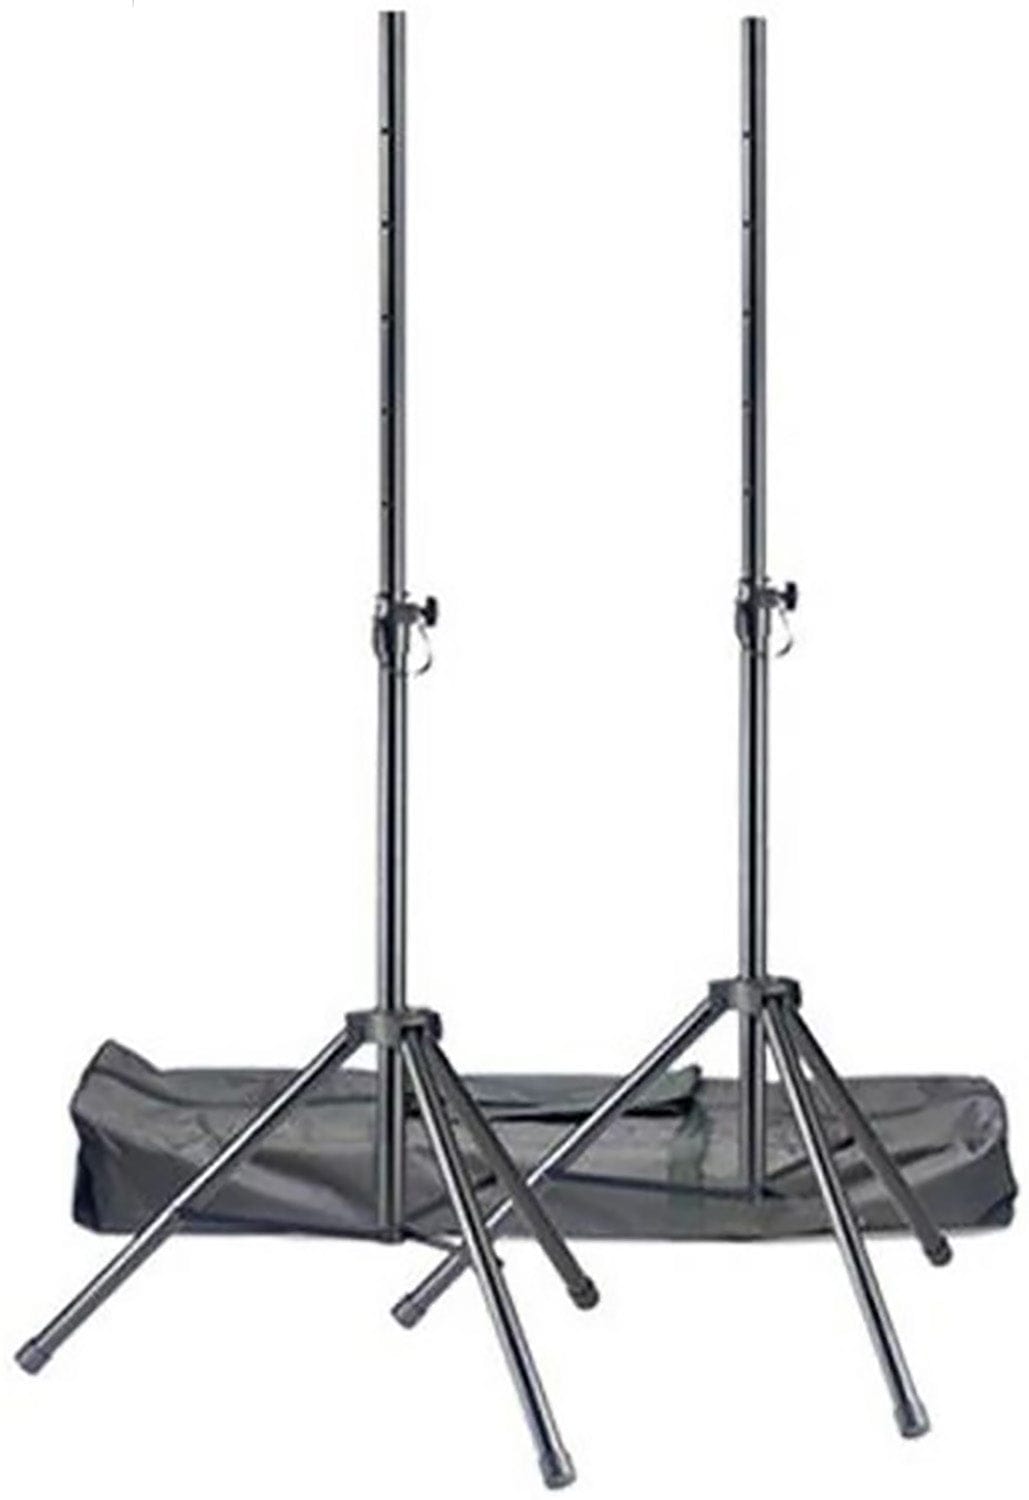 Mackie Thump212 Speakers (x2) and ProFX22v3 Analog Mixer with Stands and Cables - PSSL ProSound and Stage Lighting